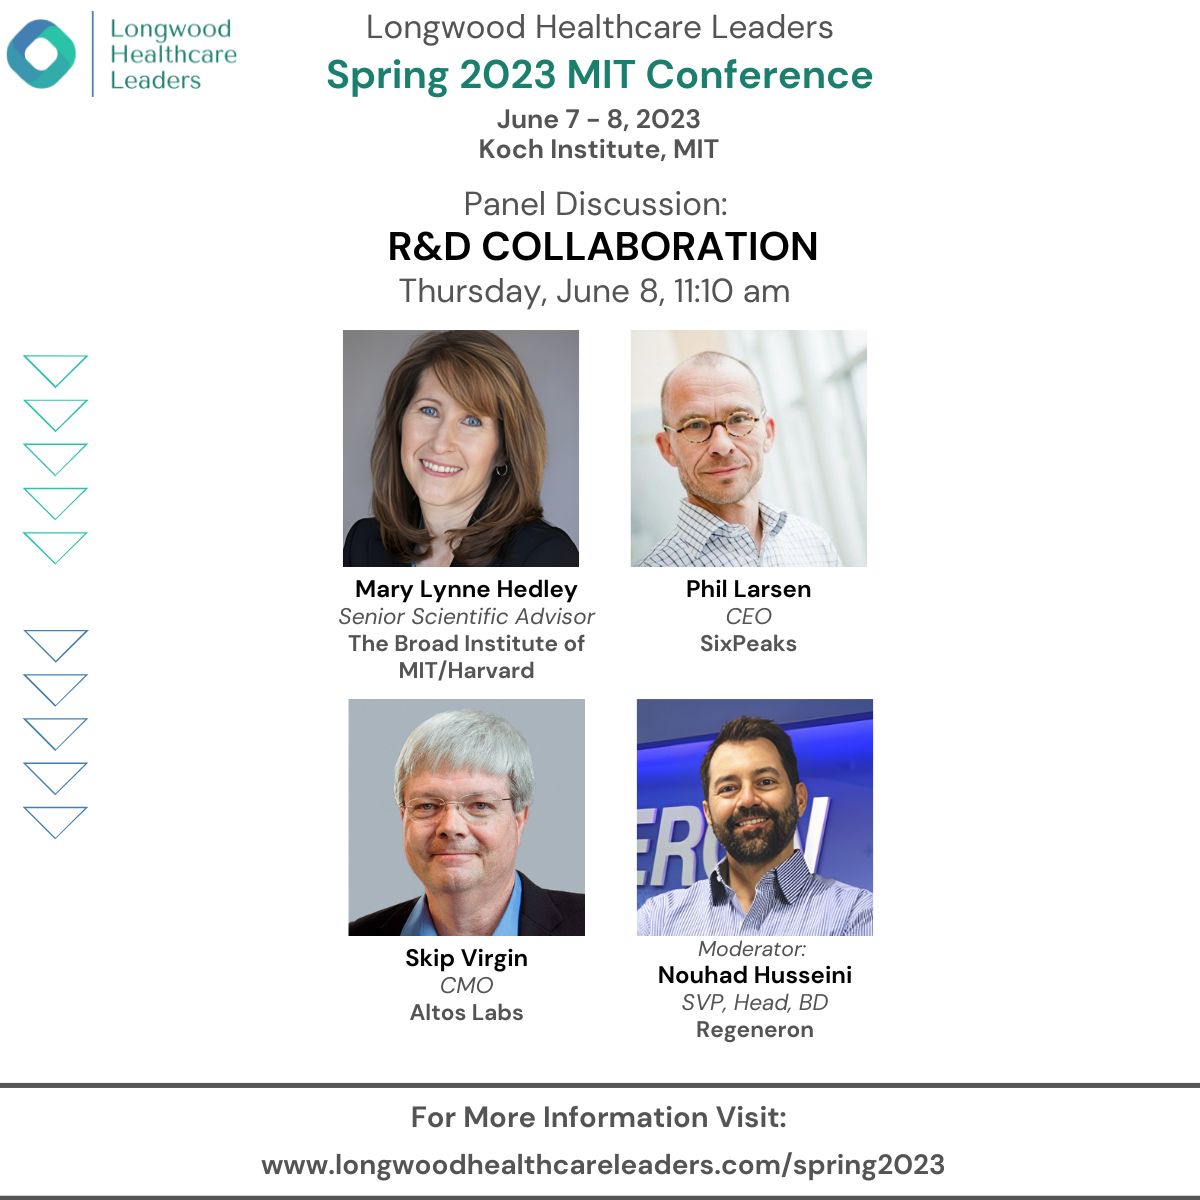 Hear learnings on R&D Collaboration from Mary Lynne Hedley @broadinstitute @MIT, Phil Larsen, Skip Virgin @altos_labs & Nouhad Husseini @Regeneron, June 8 at the @LongwoodFund Spring MIT Conference. Join us: longwoodhealthcareleaders.com/spring2023